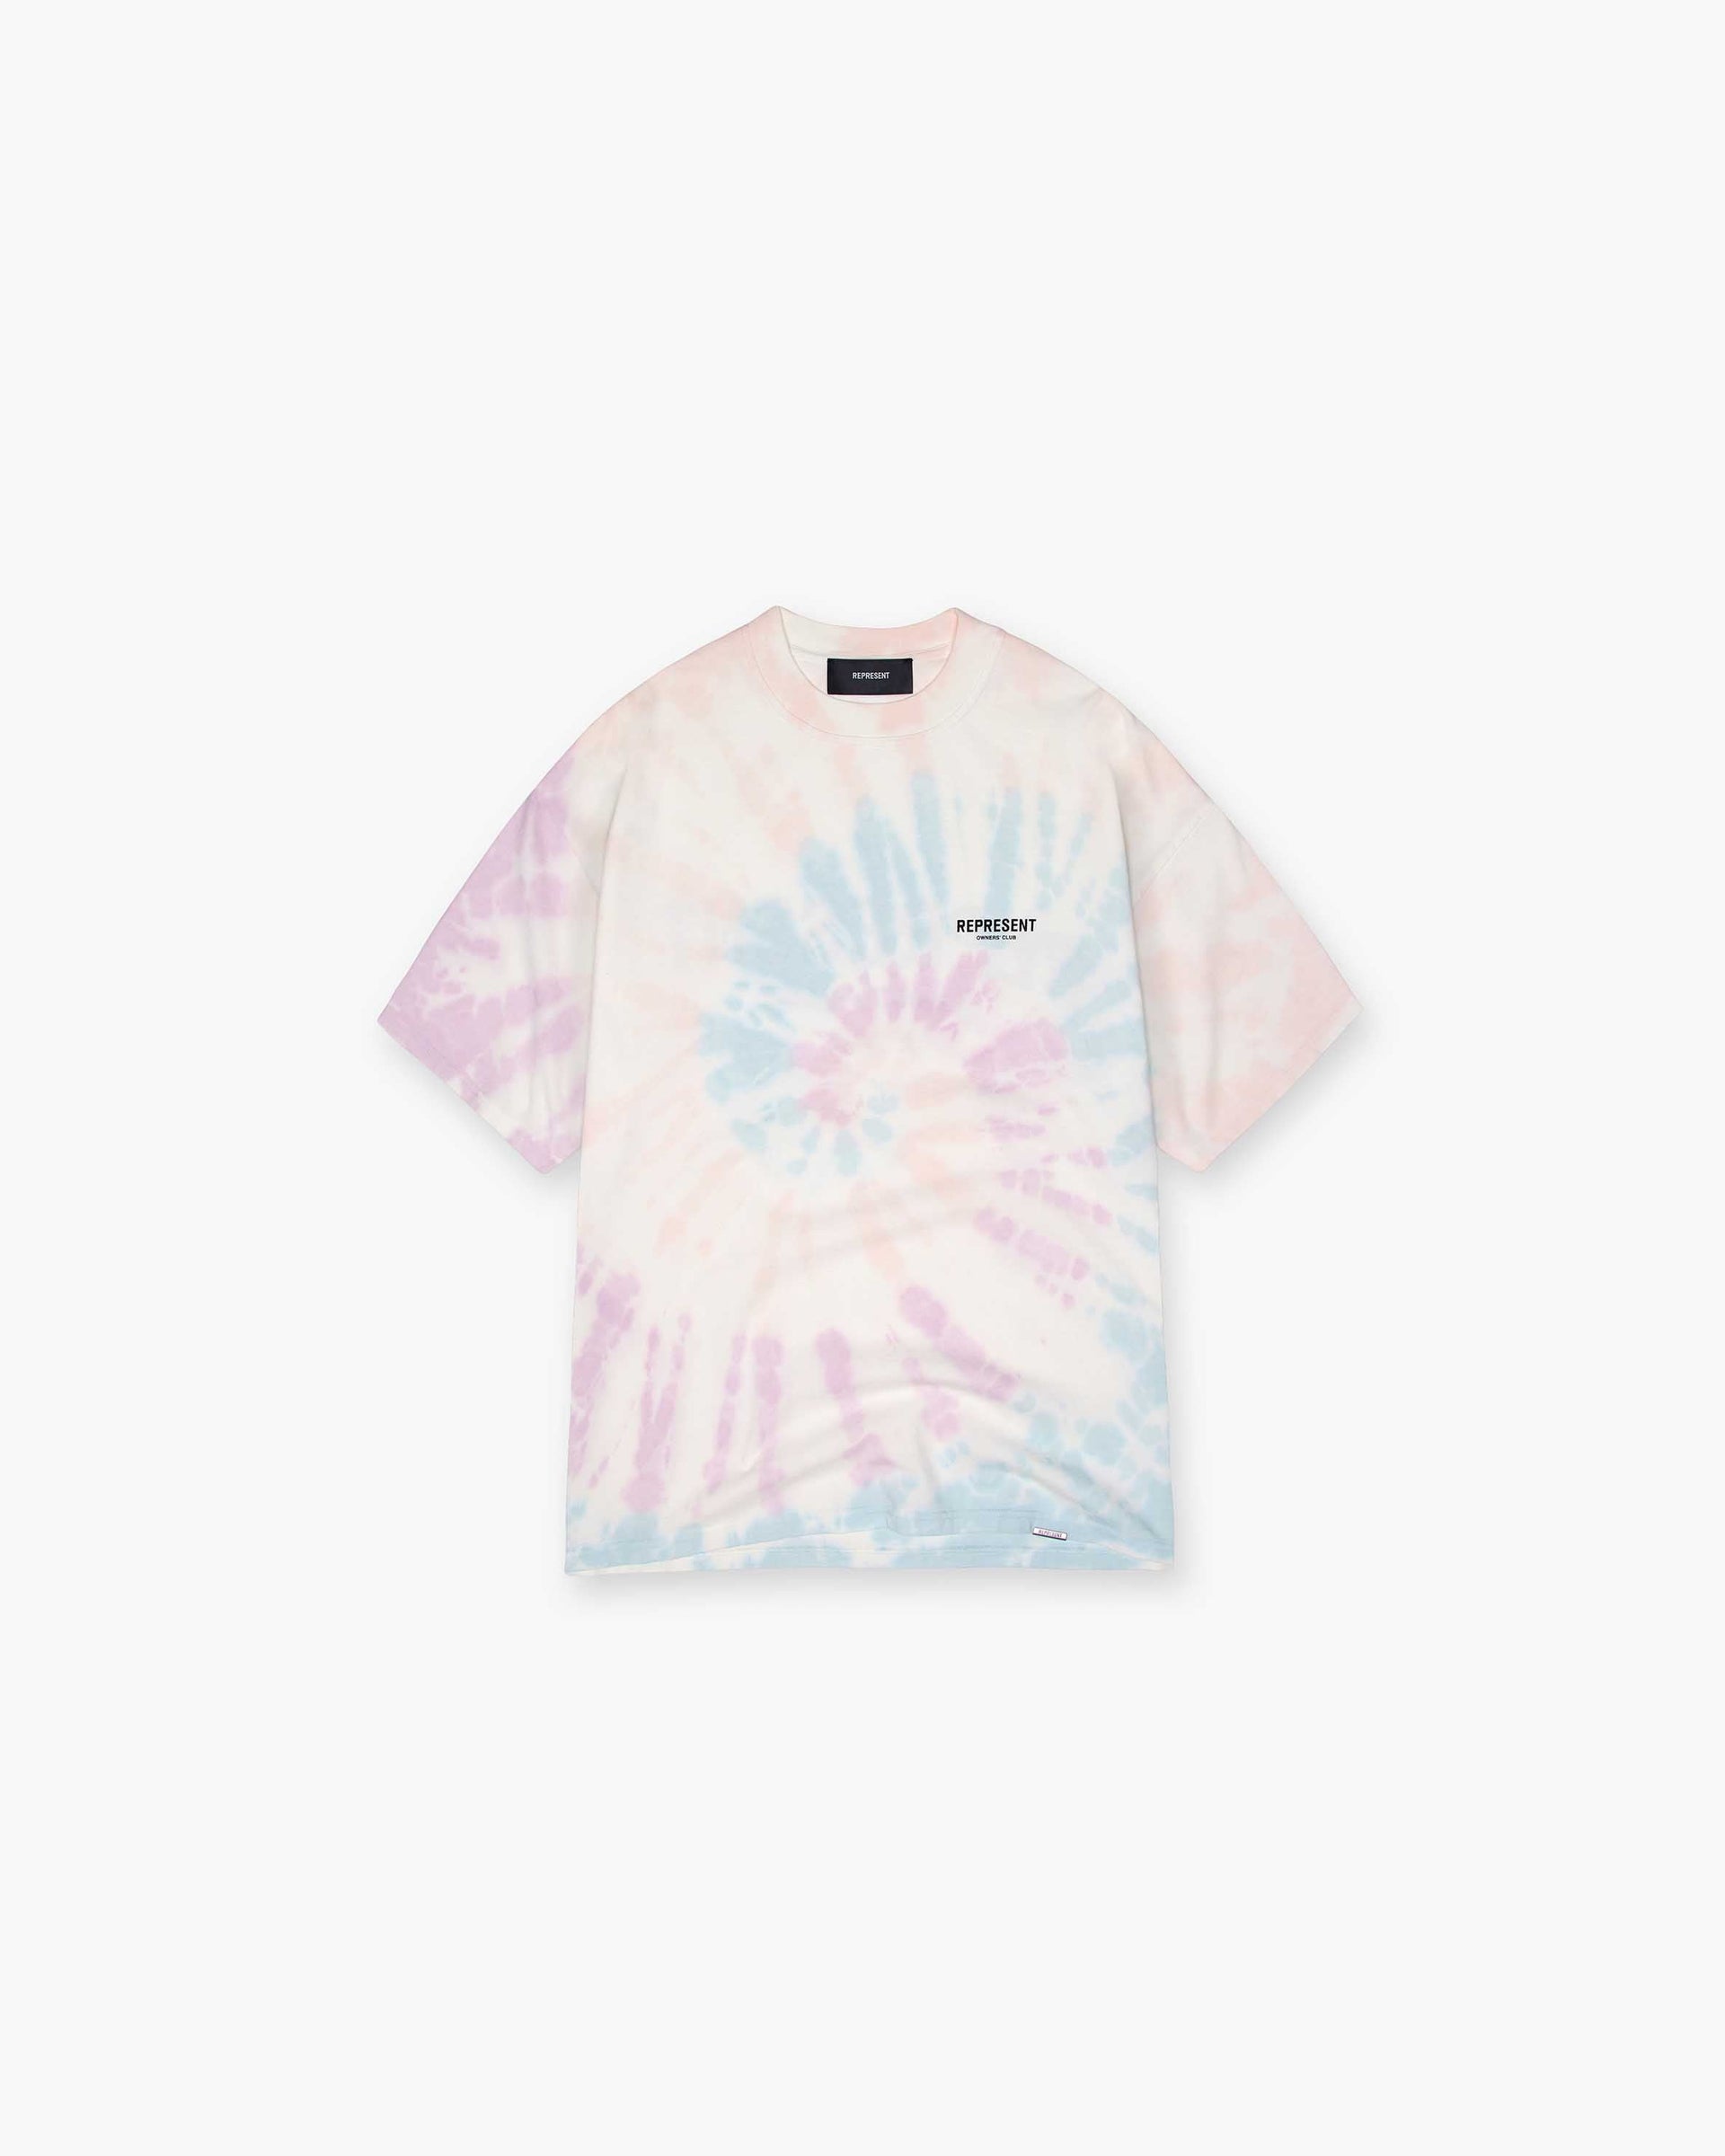 Represent Owners Club T-Shirt | Tie Dye T-Shirts Owners Club | Represent Clo